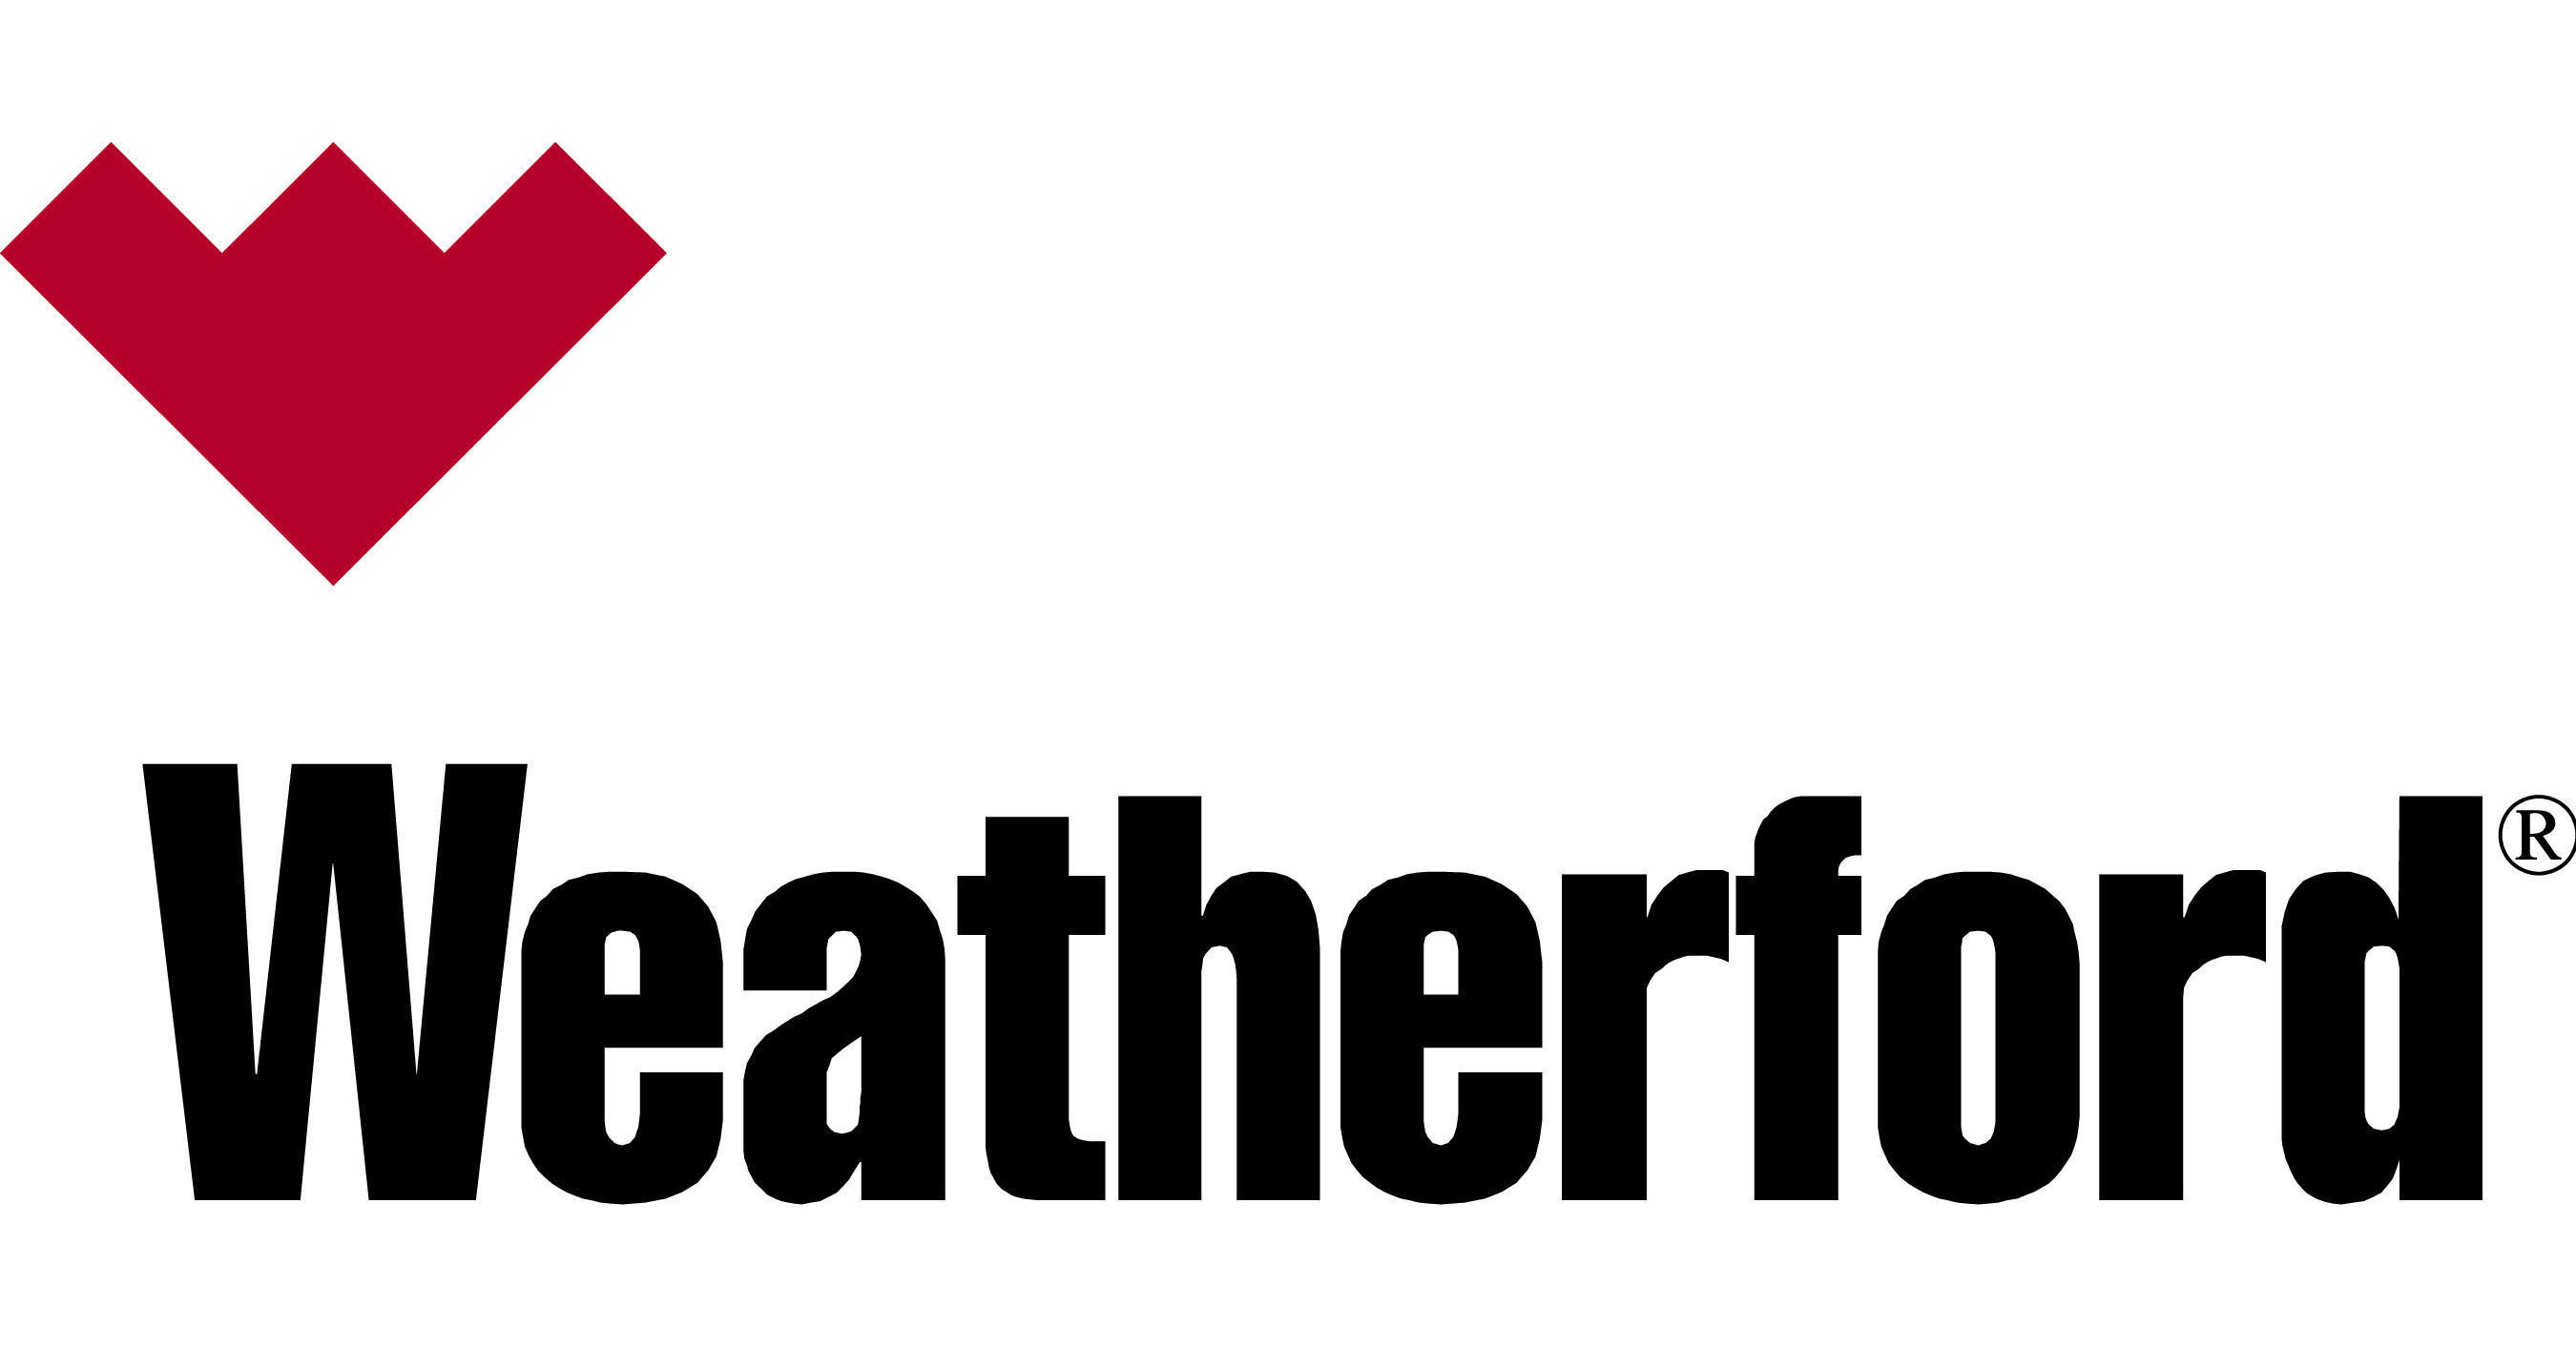 Weatherford Completes Sale of U.S. Hydraulic Fracturing Business to Schlumberger for $430 Million in Cash